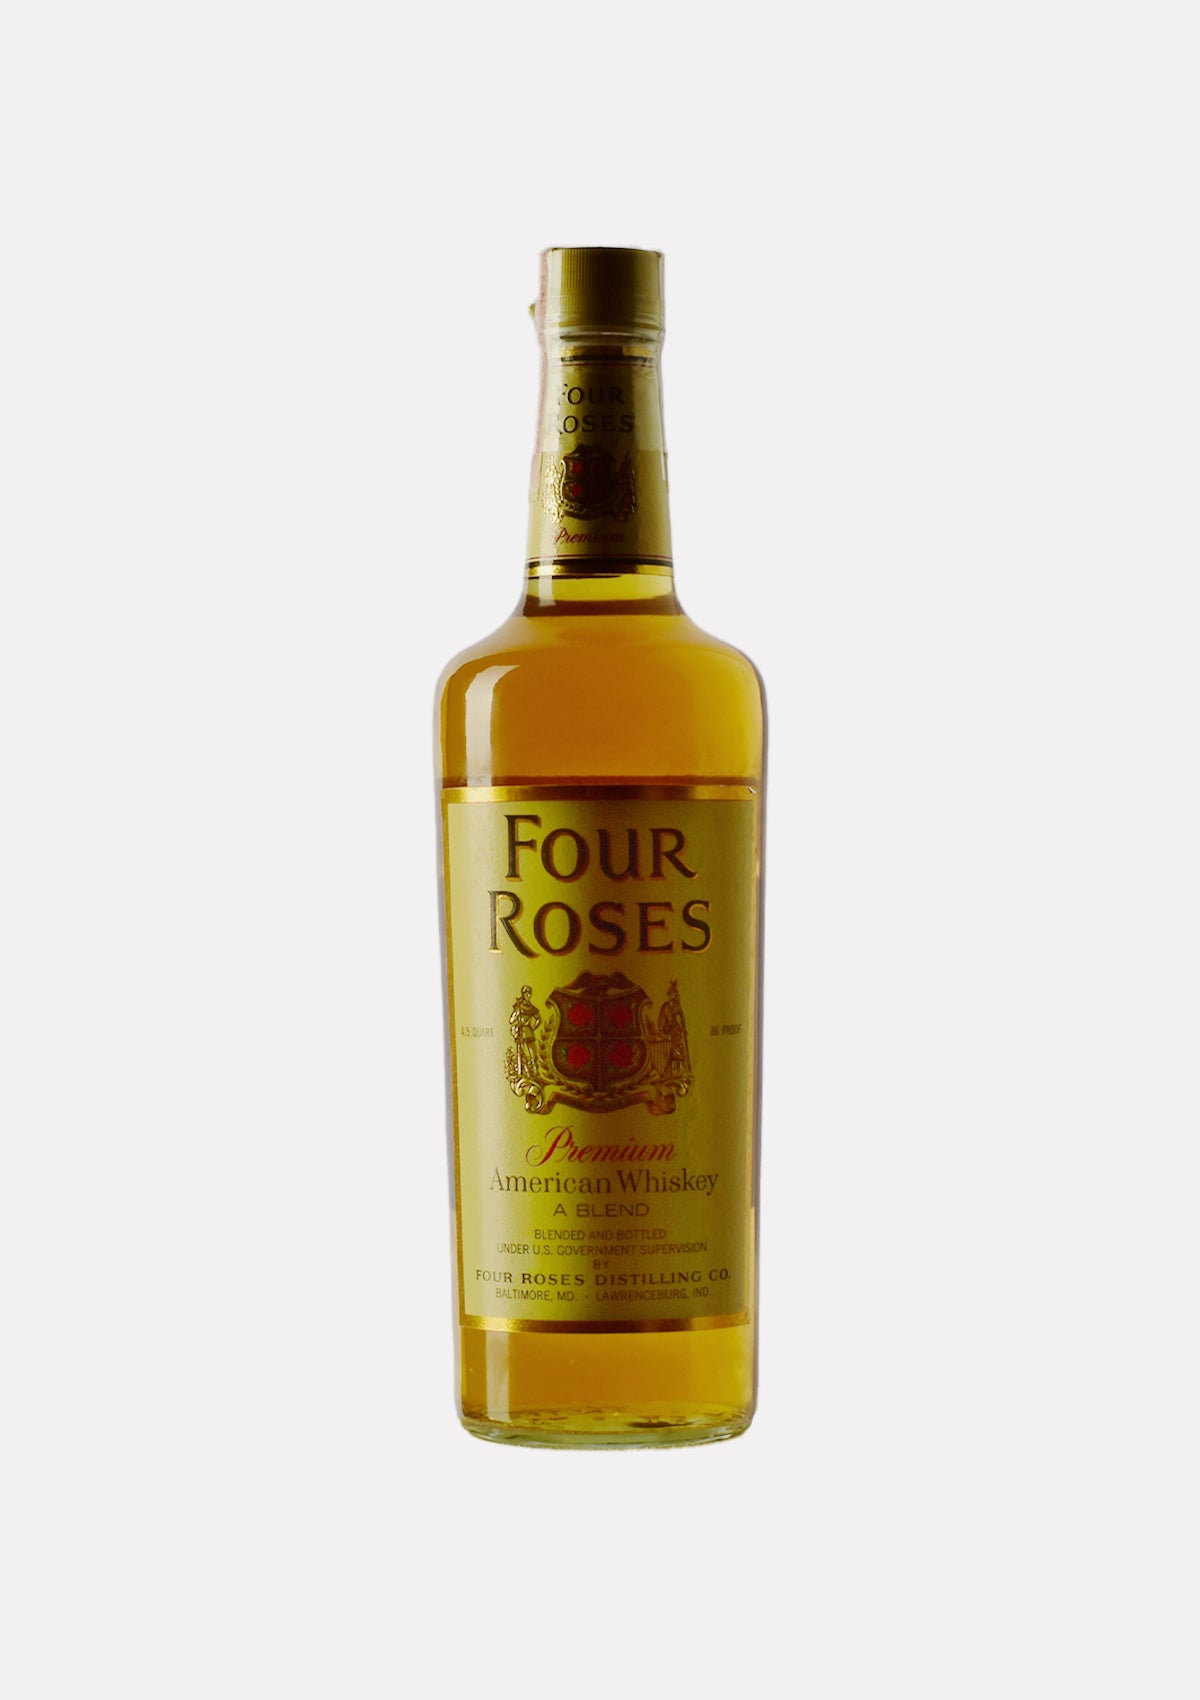 Four Roses Premium American Whiskey A Blend